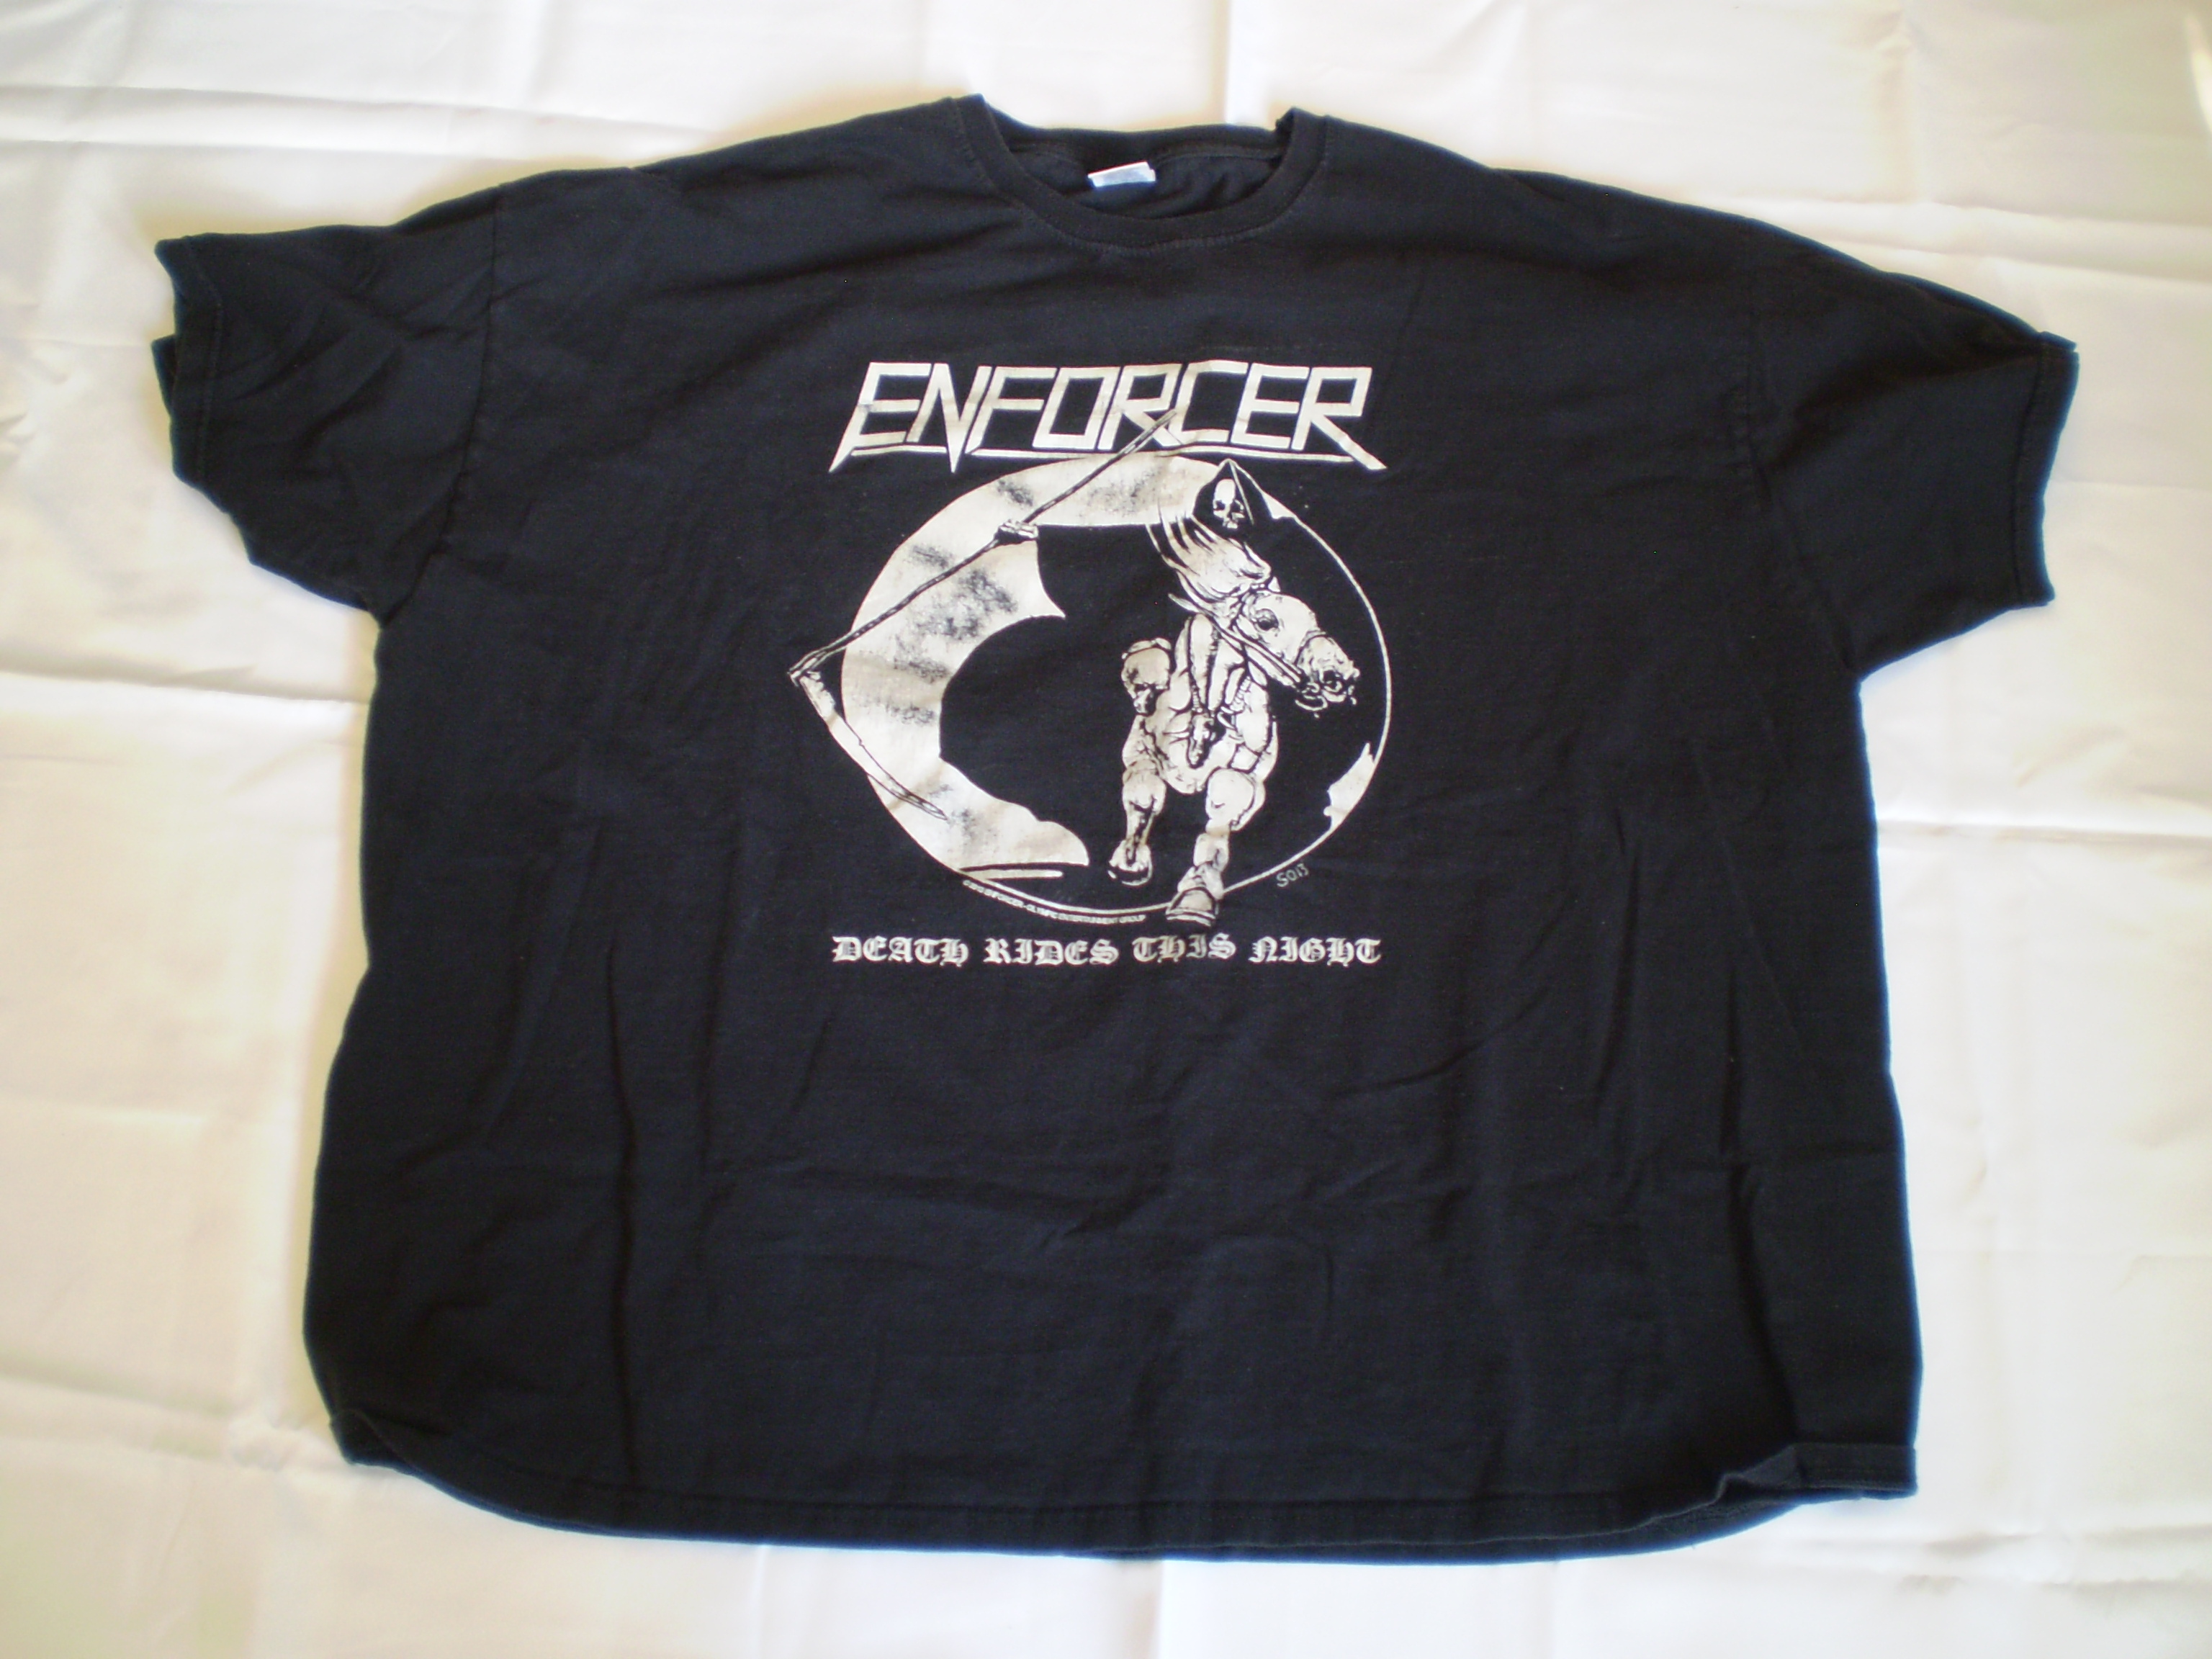 Enforcer - Death Rides This Night TS